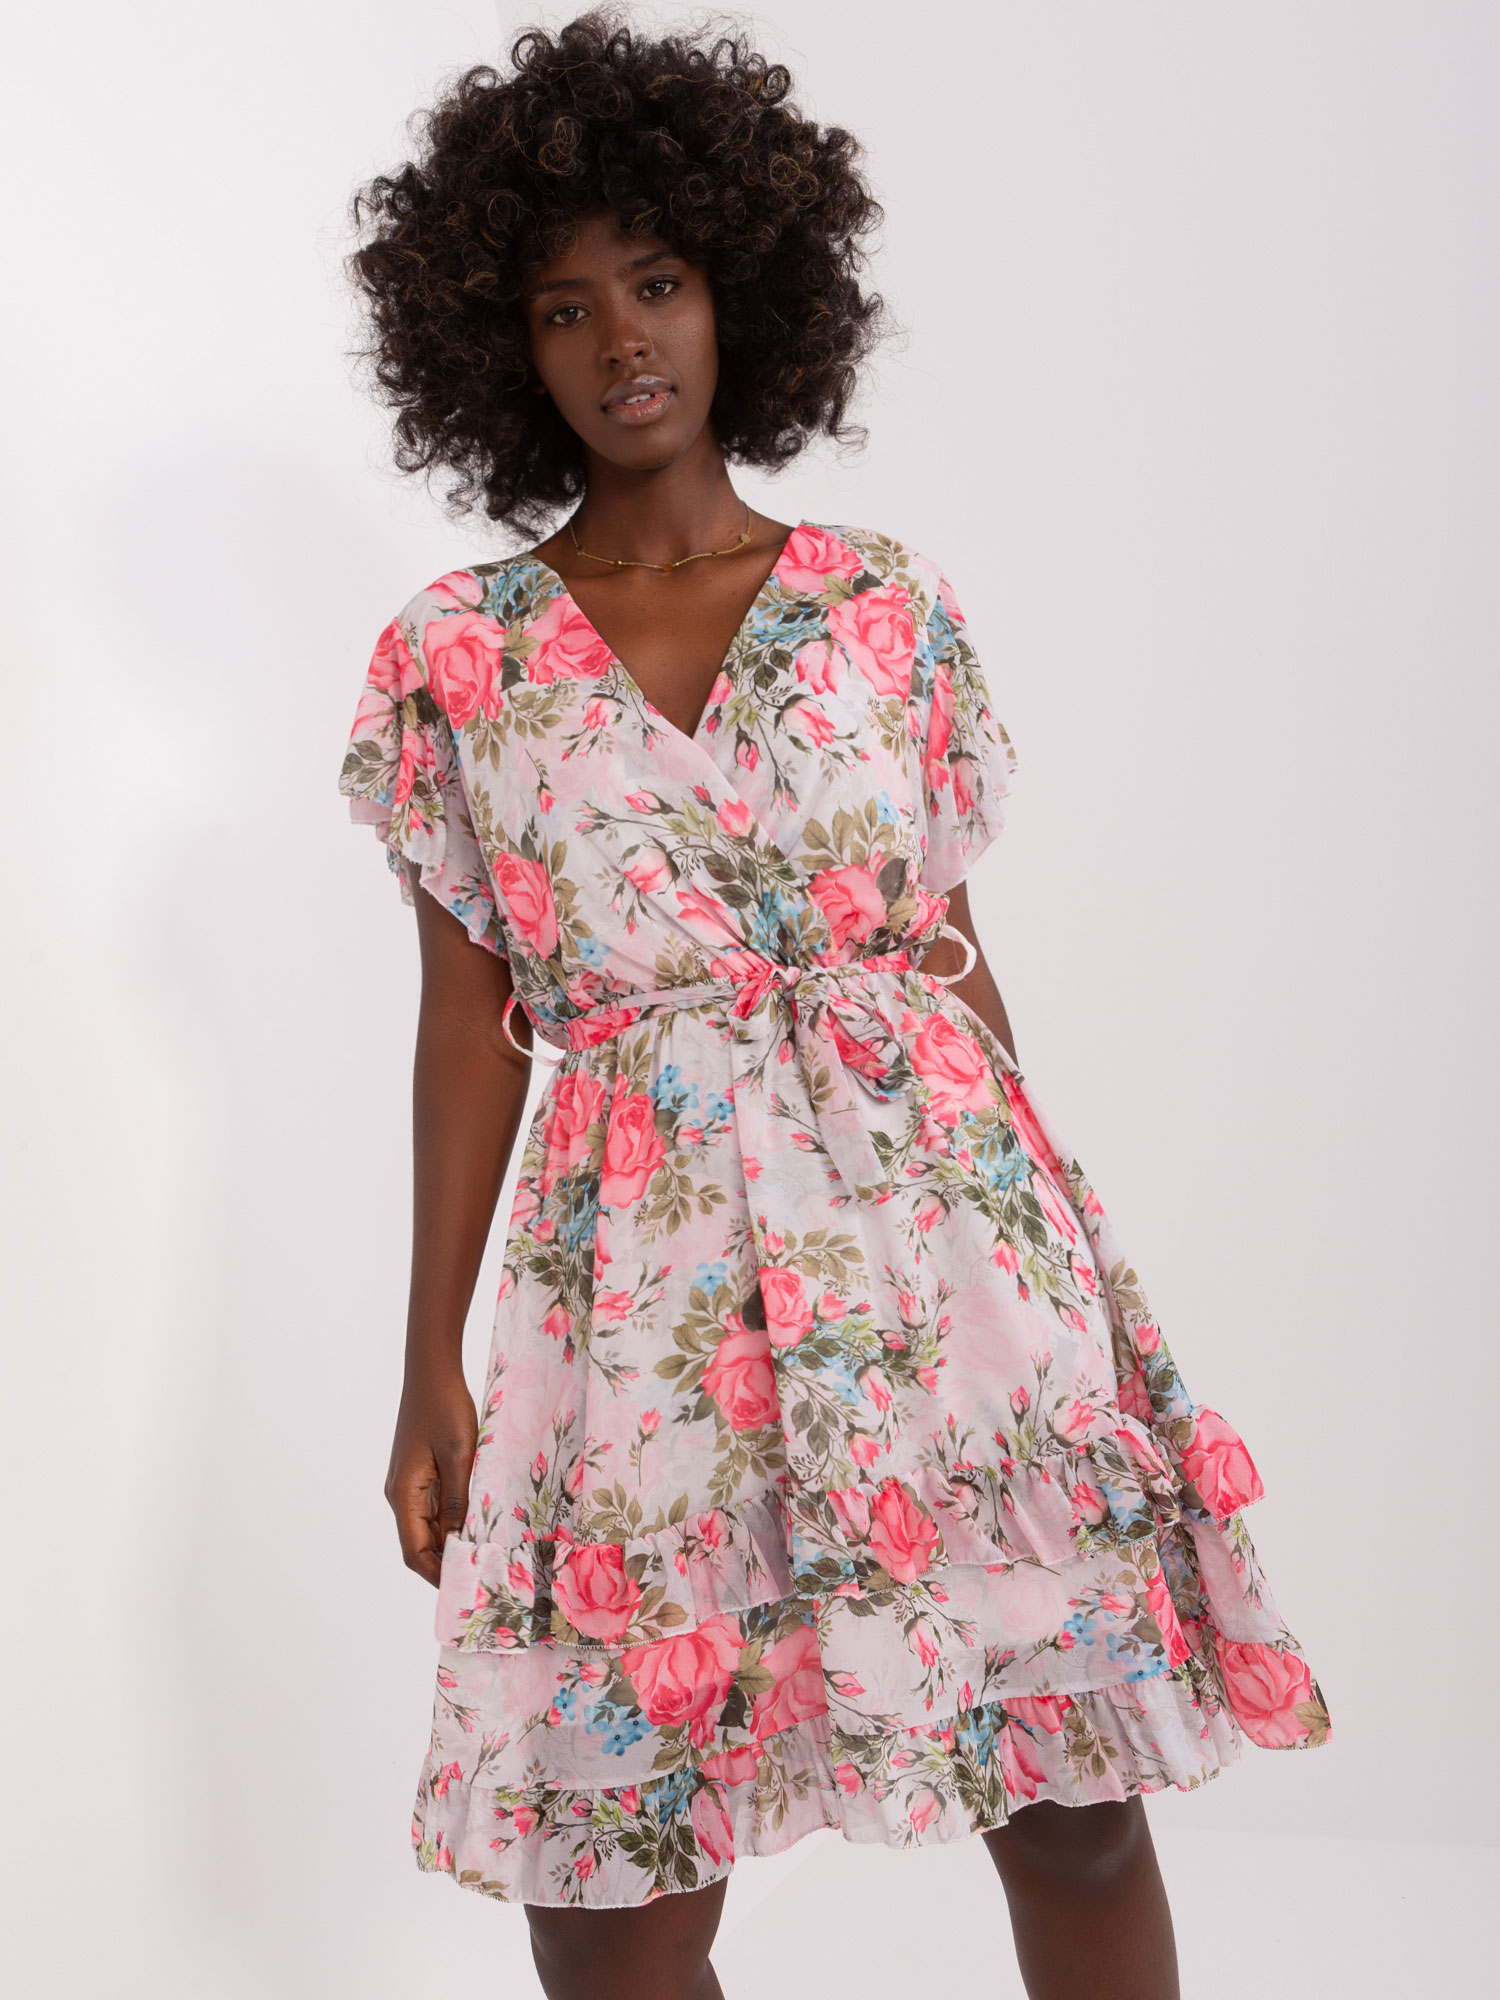 Light gray and pink floral dress with ruffle